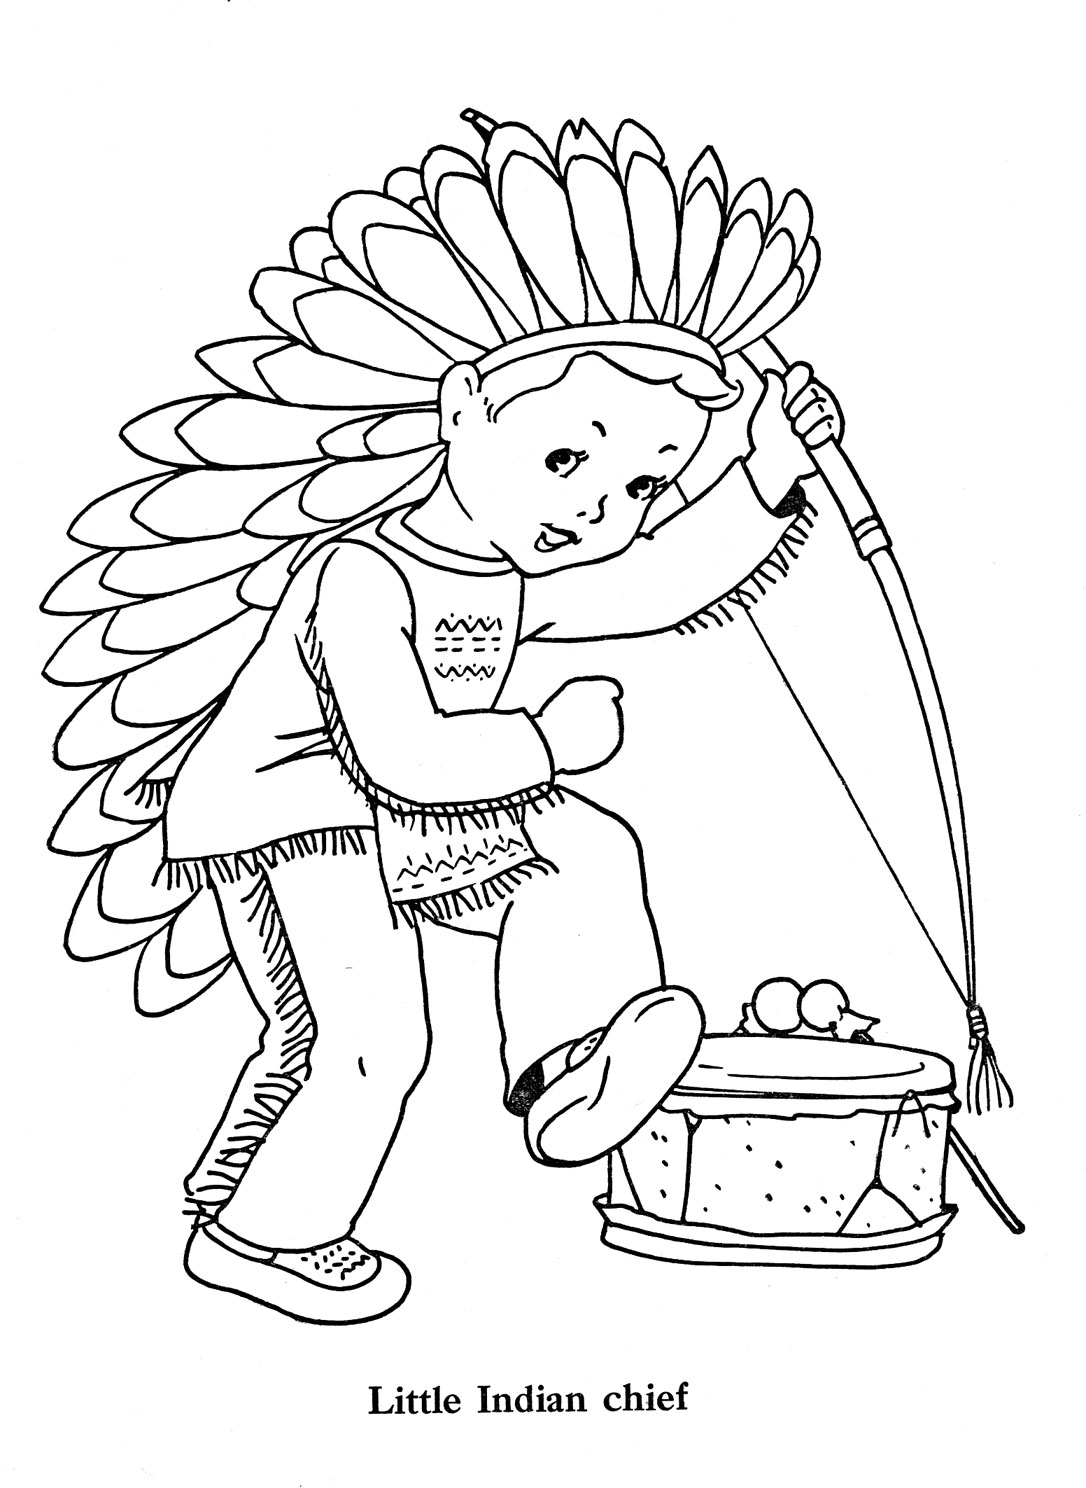 Pilgrim Indian Coloring Pages Indian Coloring Pages Best Coloring Pages For Kids